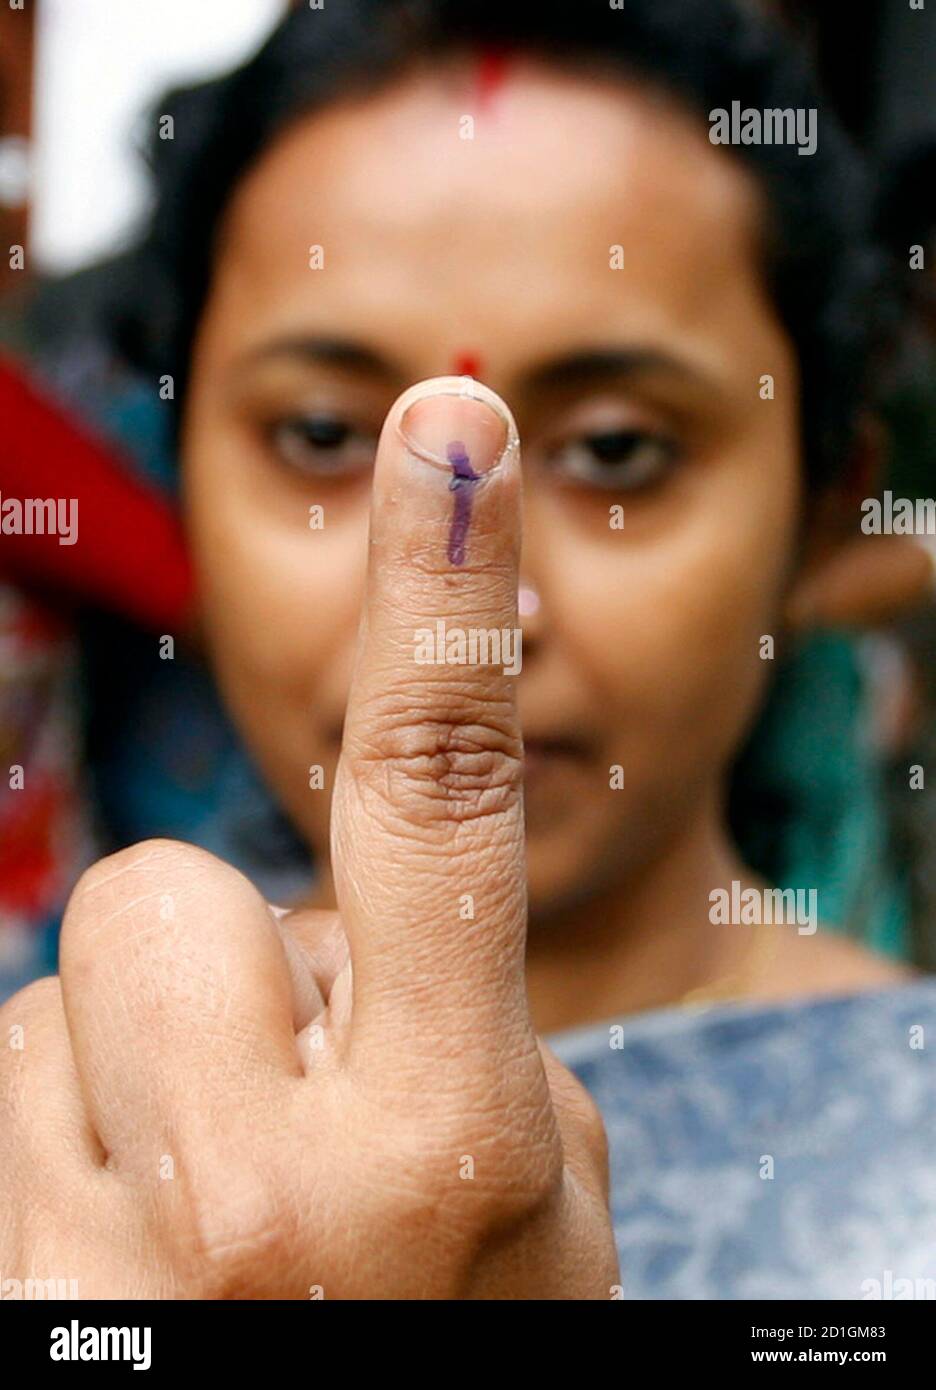 A voter shows the indelible ink mark on her finger after casting her ballot at a polling booth in the eastern Indian city of Siliguri April 30, 2009. Millions of Indians began voting in the third round of a general election on Thursday in several states seen as key to the Hindu-nationalist Bharatiya Janata Party's bid to win power from the Congress-led ruling coalition. REUTERS/Rupak De Chowdhuri (INDIA ELECTIONS POLITICS) Stock Photo